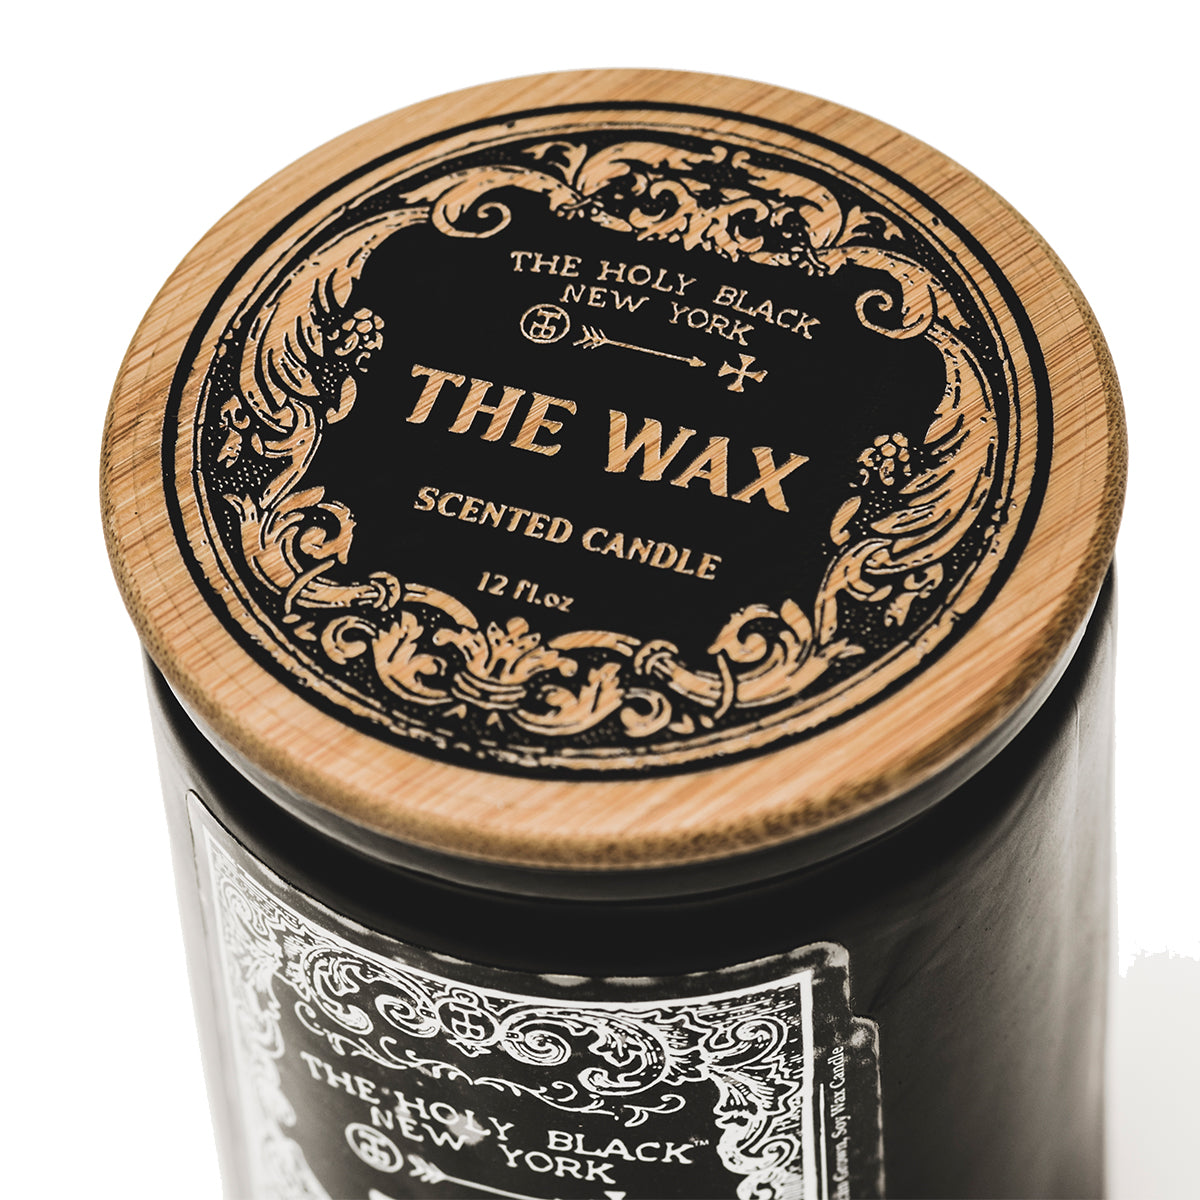 THE WAX Scented Candle